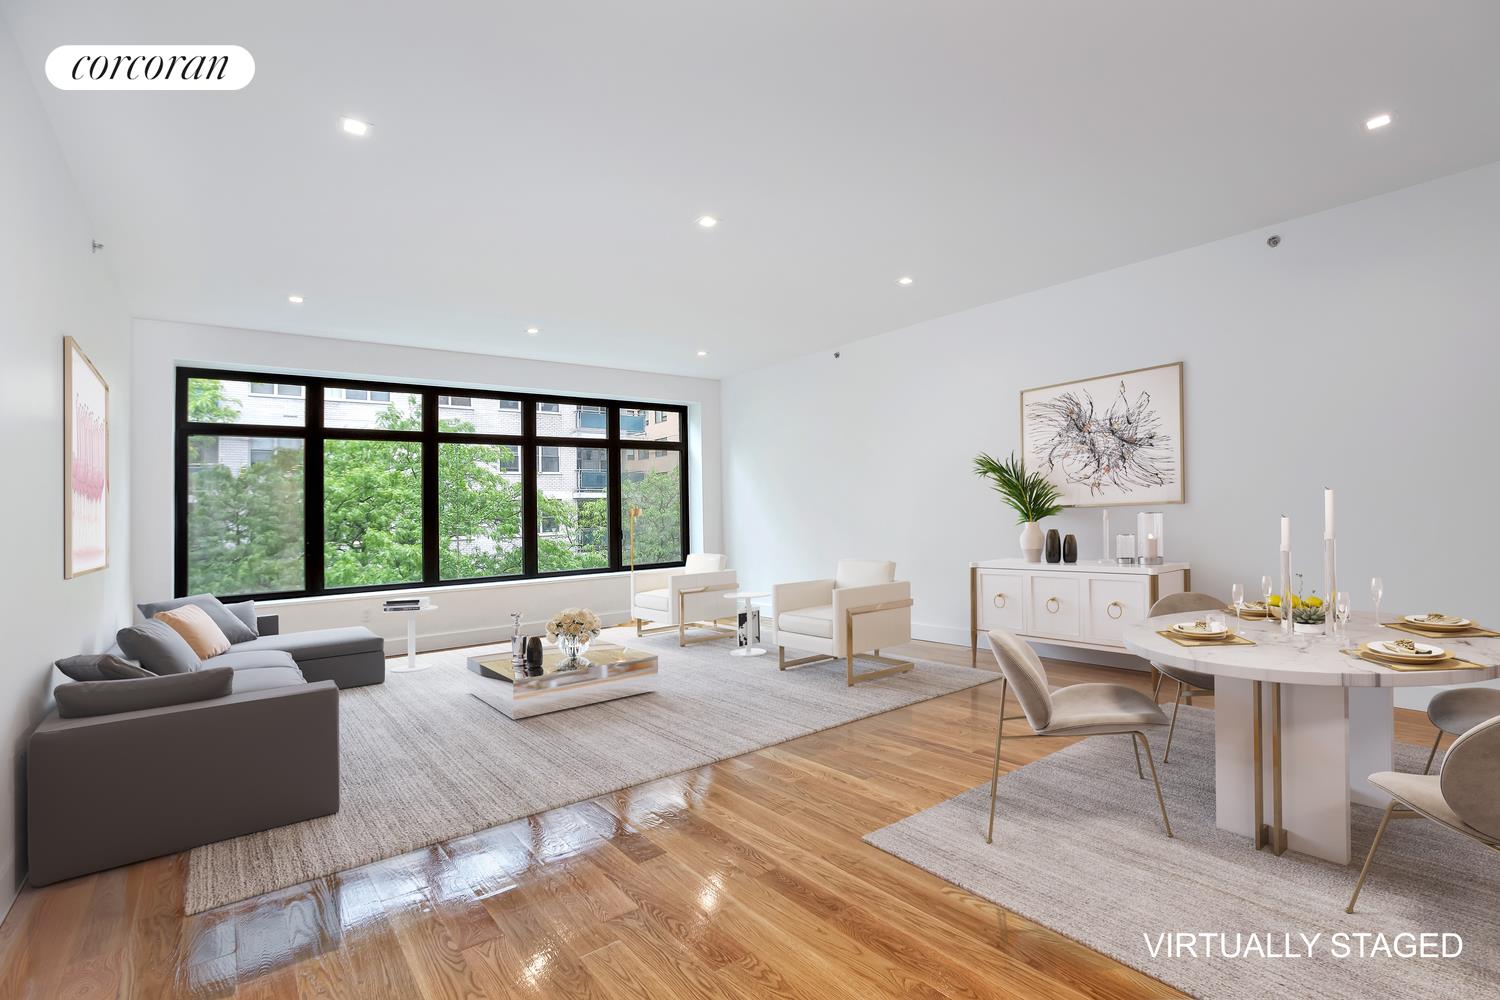 223 East 80th Street 3, Yorkville, Upper East Side, NYC - 2 Bedrooms  
3 Bathrooms  
4 Rooms - 